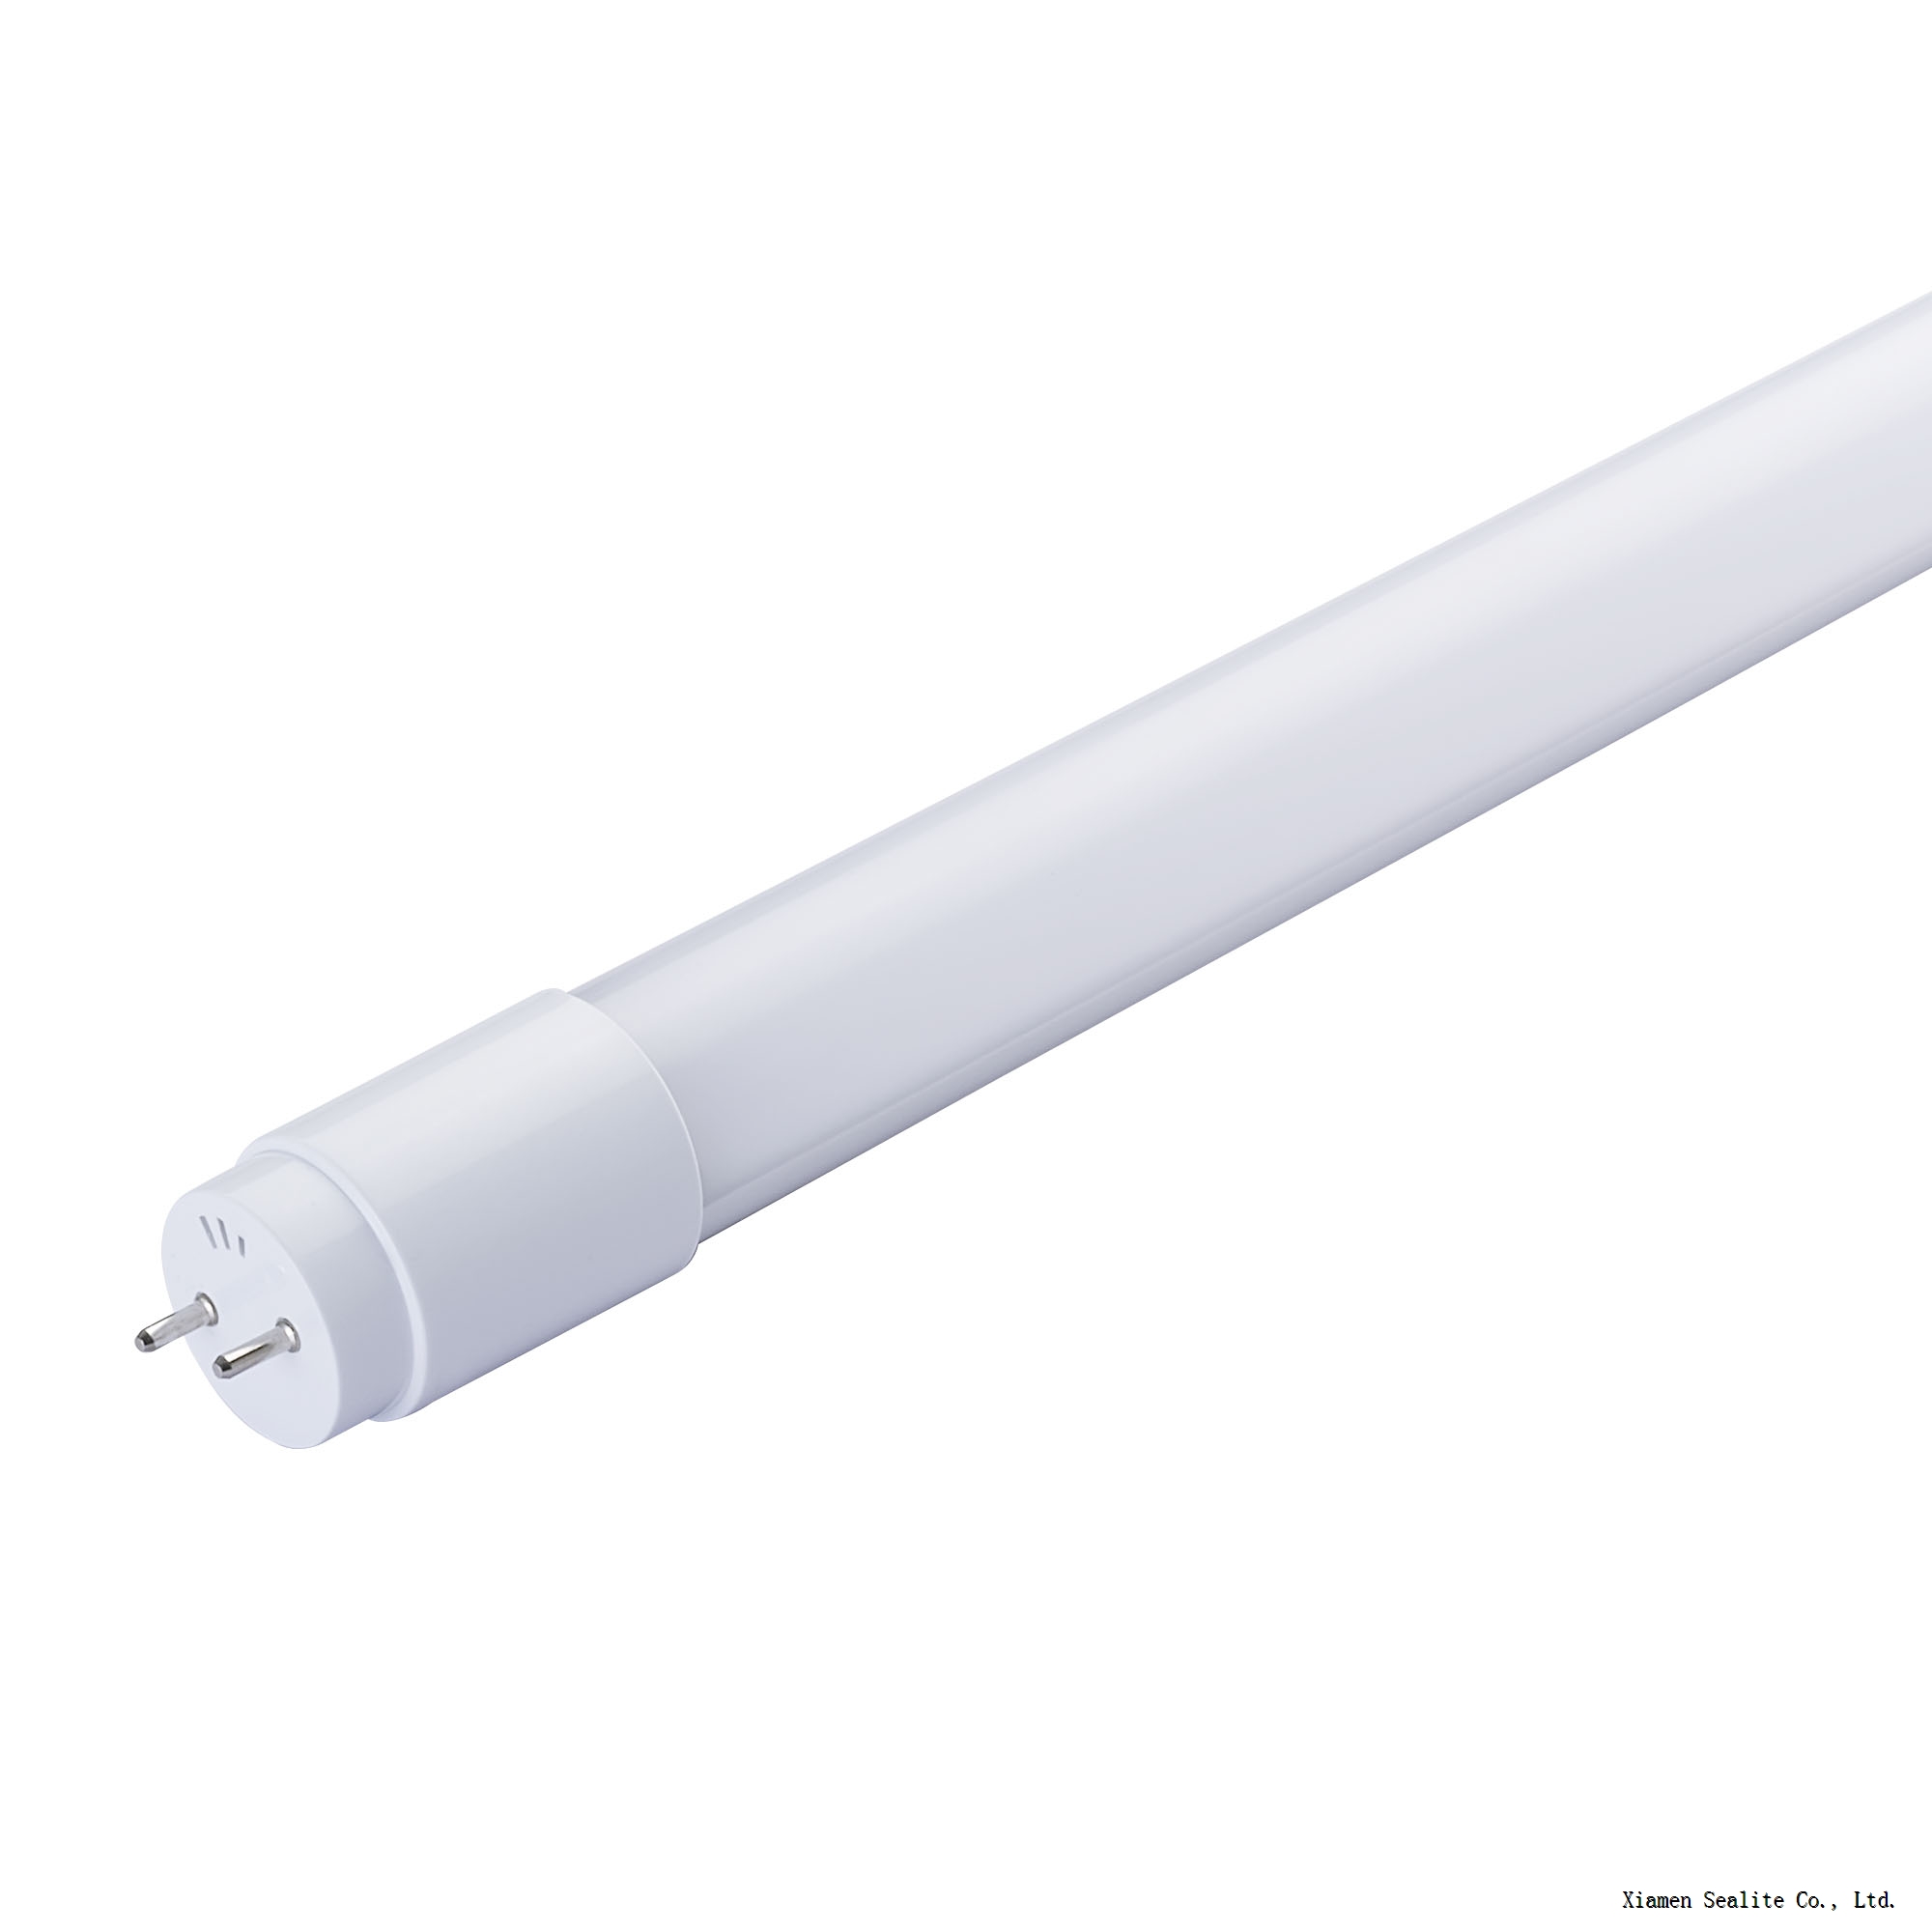 NEWWISH LED Tube T8 22W 1200mm with PC Cover